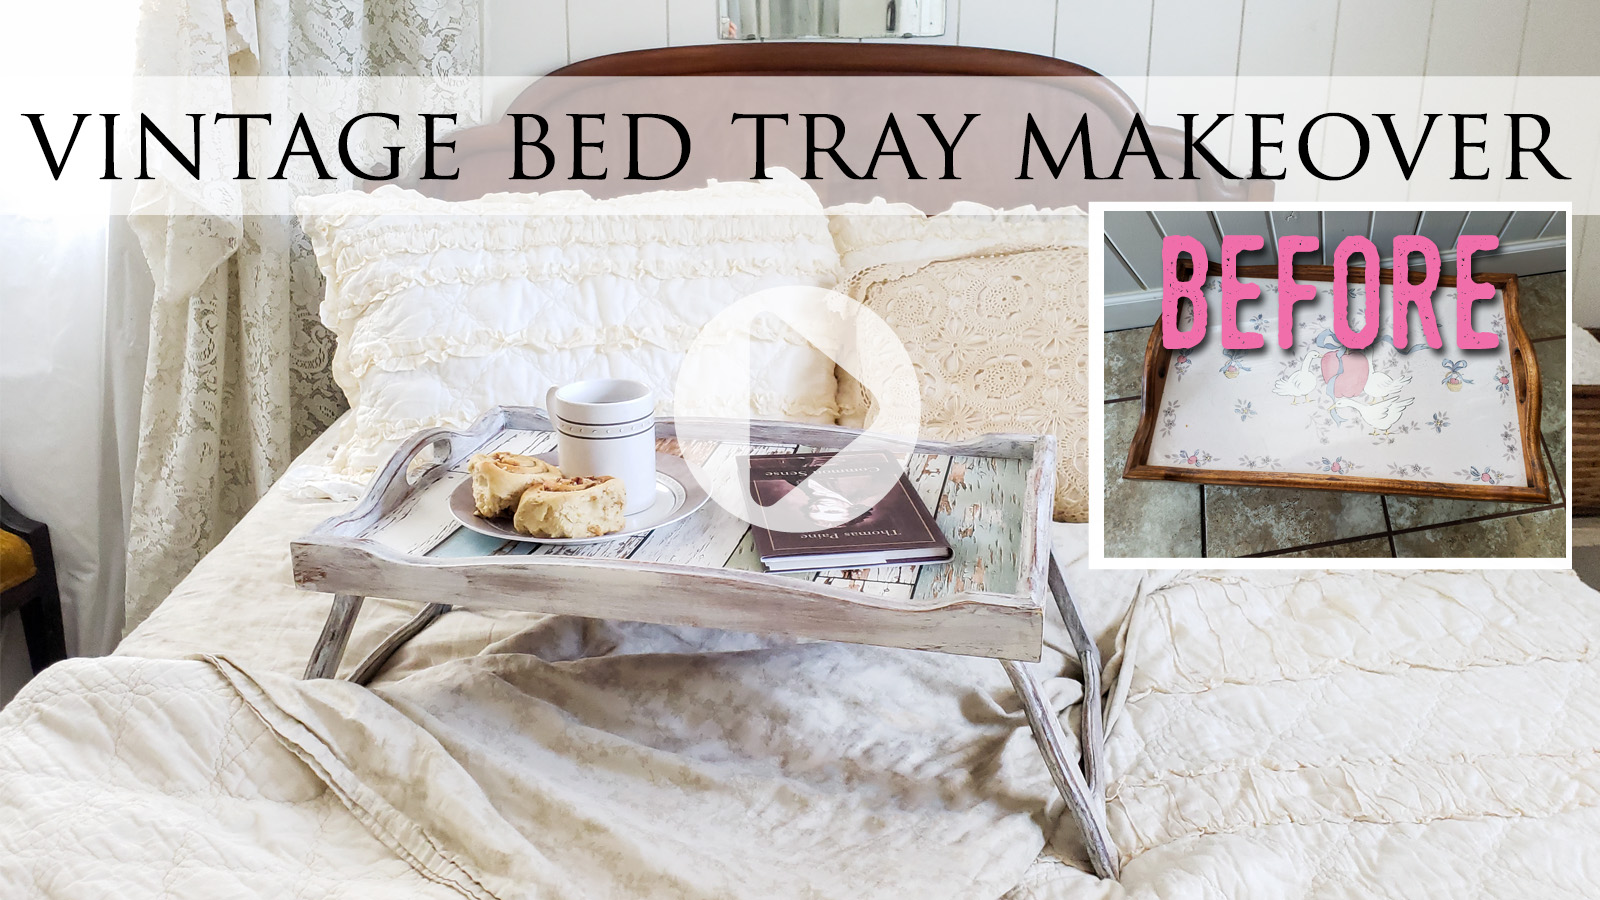 Video Tutorial for Vintage Bed Tray Makeover by Larissa of Prodigal Pieces | prodigalpieces.com